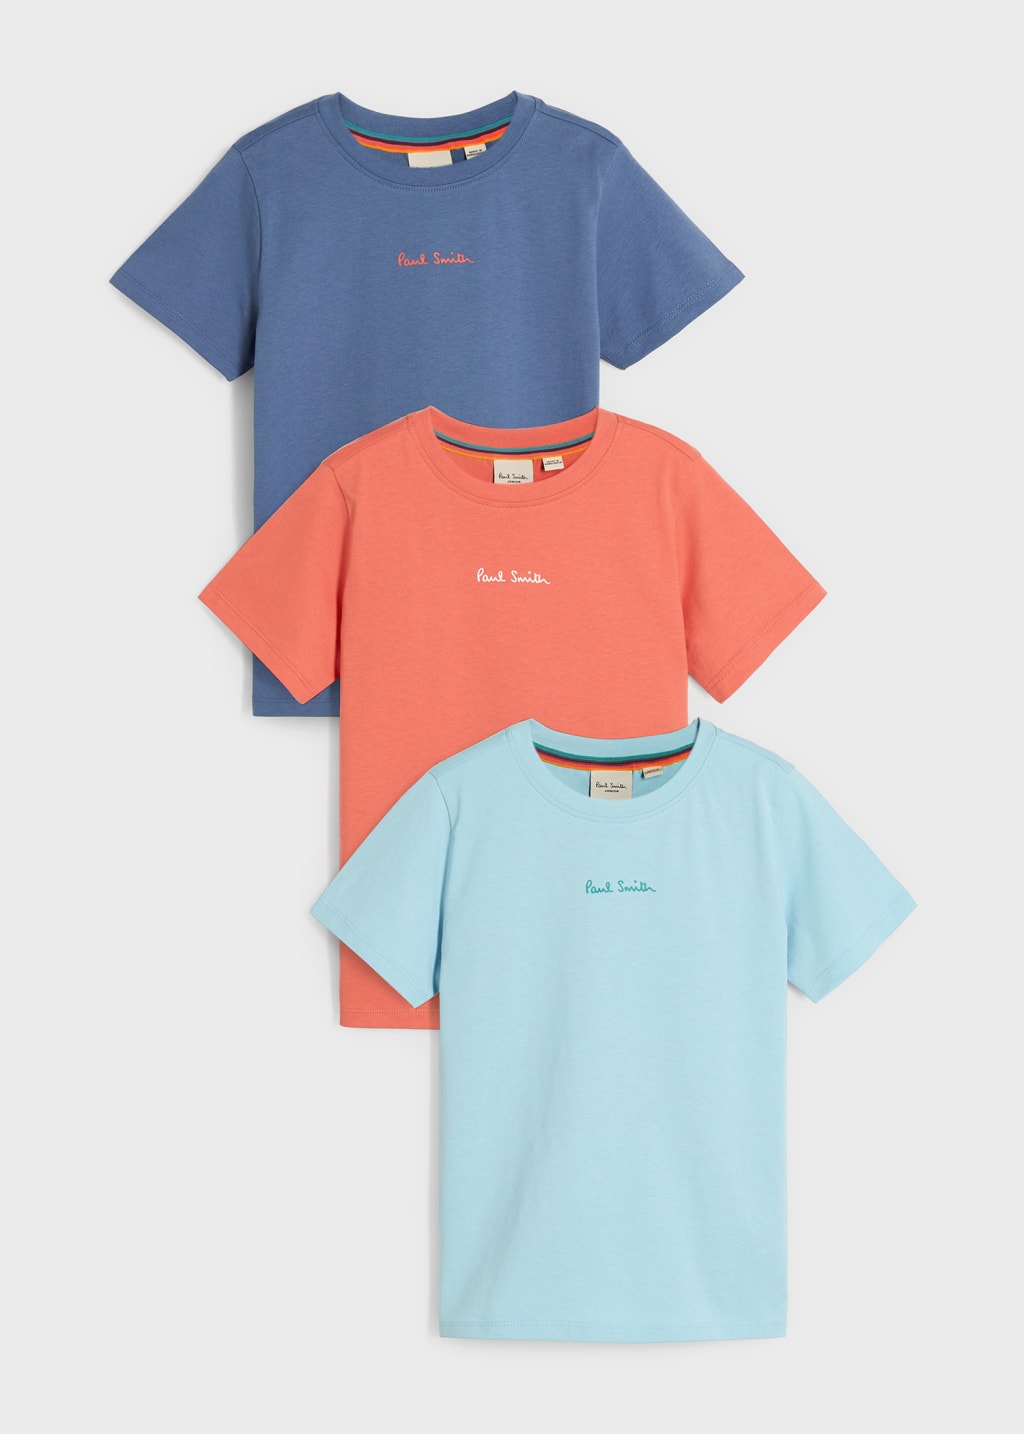 Product view - 2-13 Years Navy, Coral & Blue Signature T-Shirts Set 3 Pack